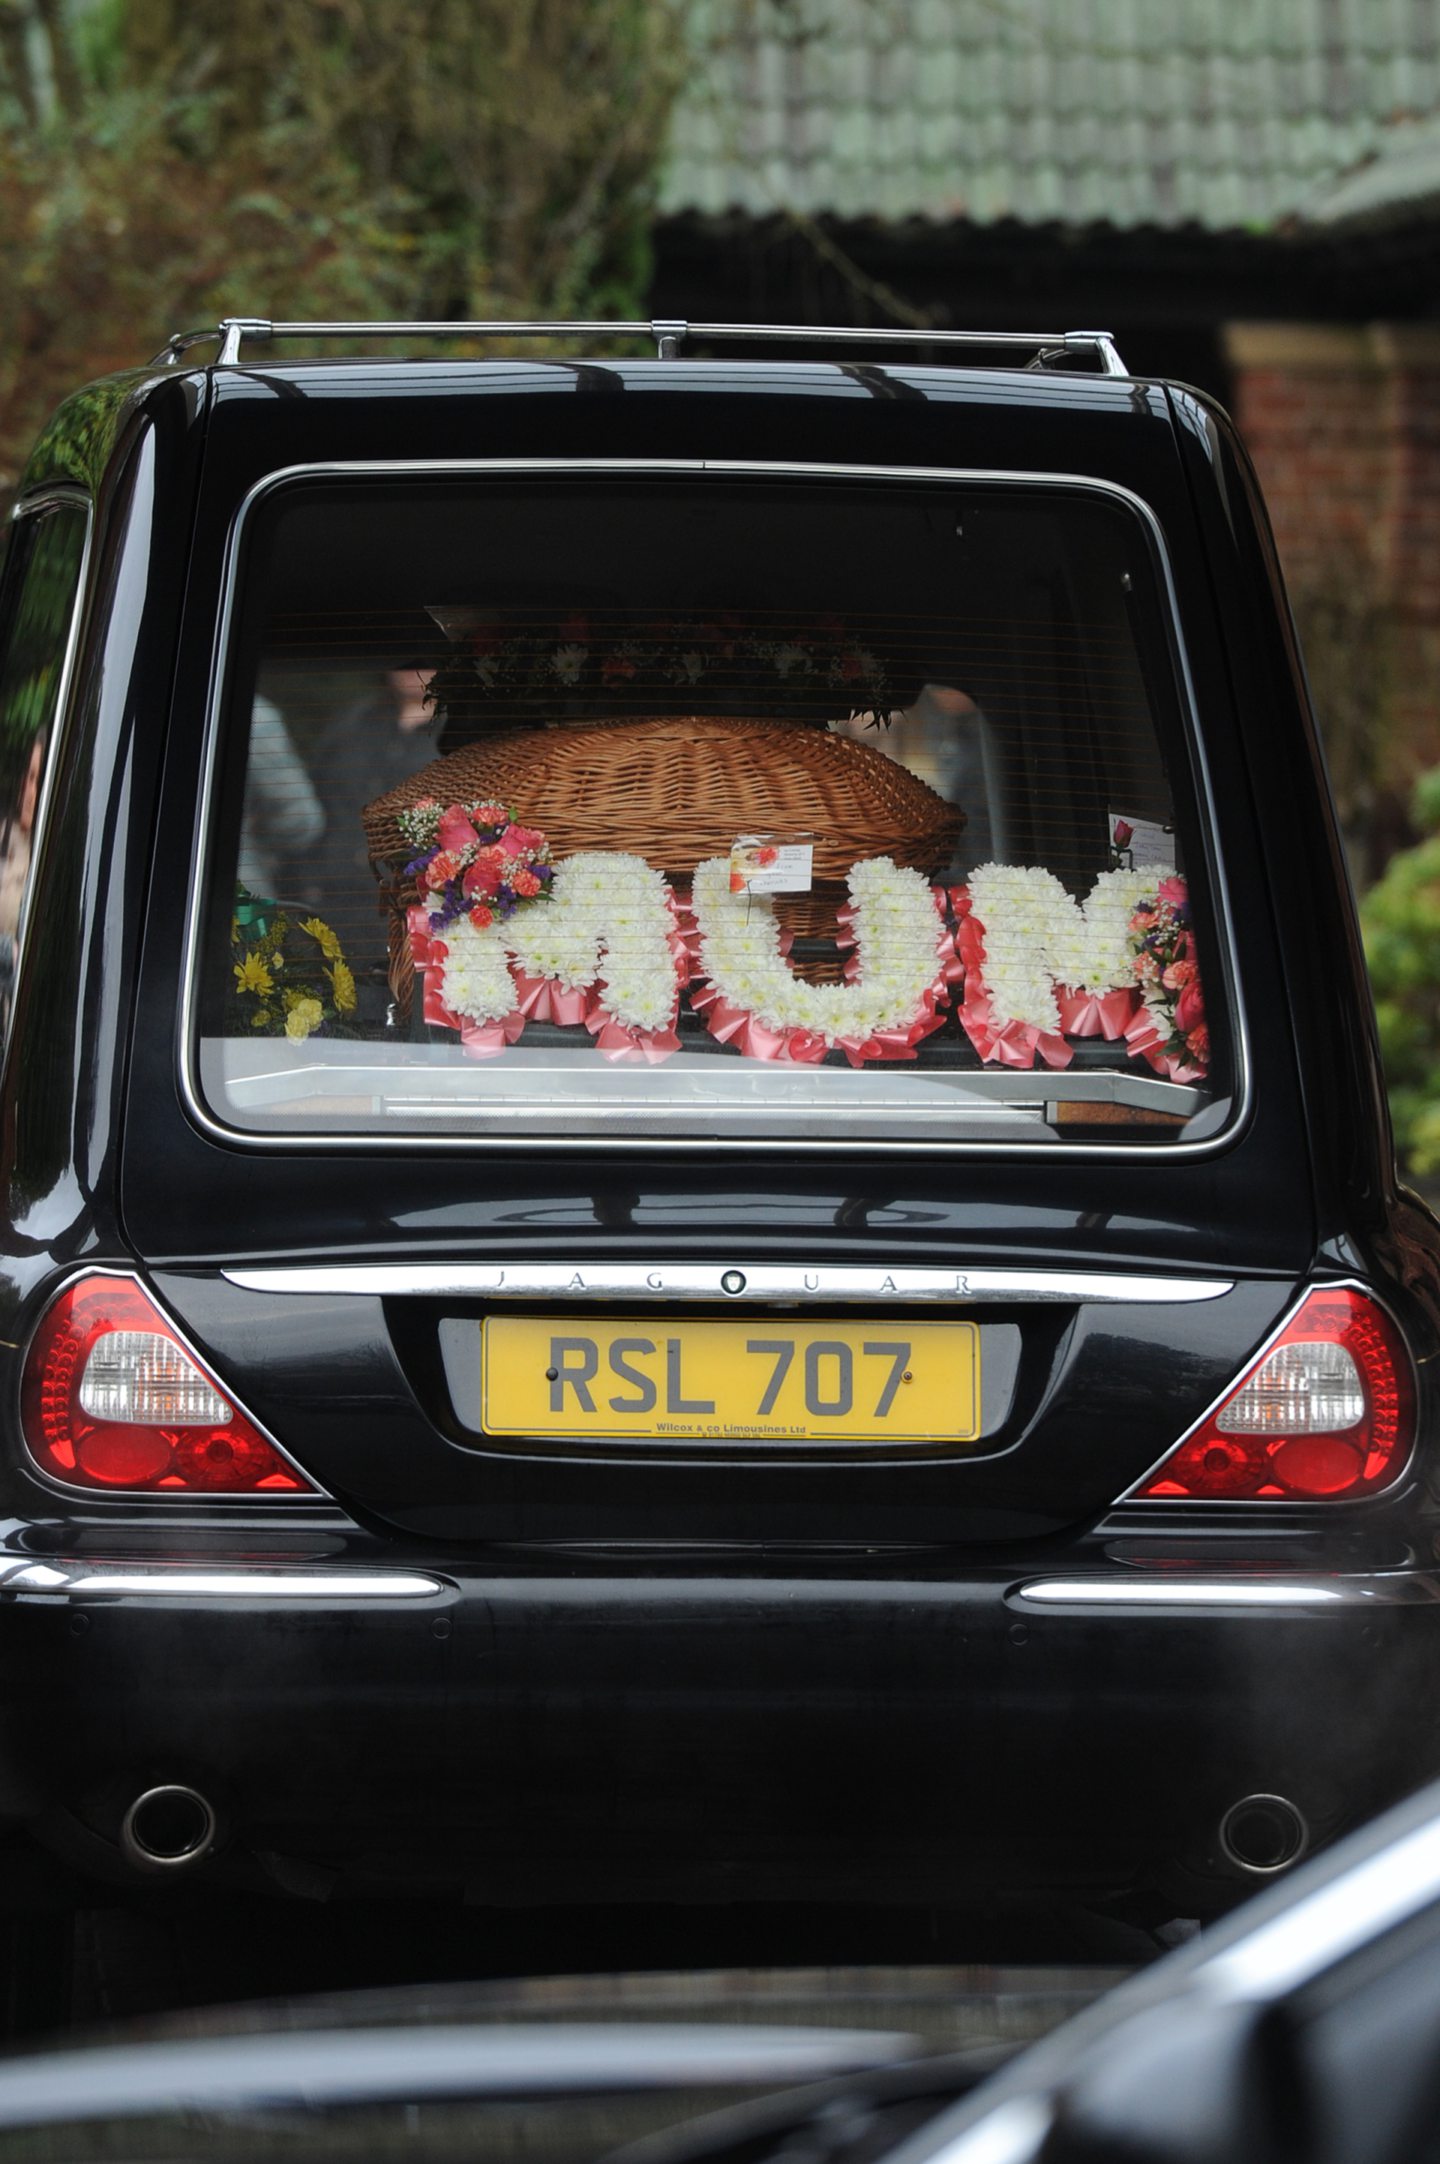 The hearse arriving for the funeral of Lucille McLauchlan. A floral arrangement inside spells out Mum. Image: Kim Cessford/DC Thomson.